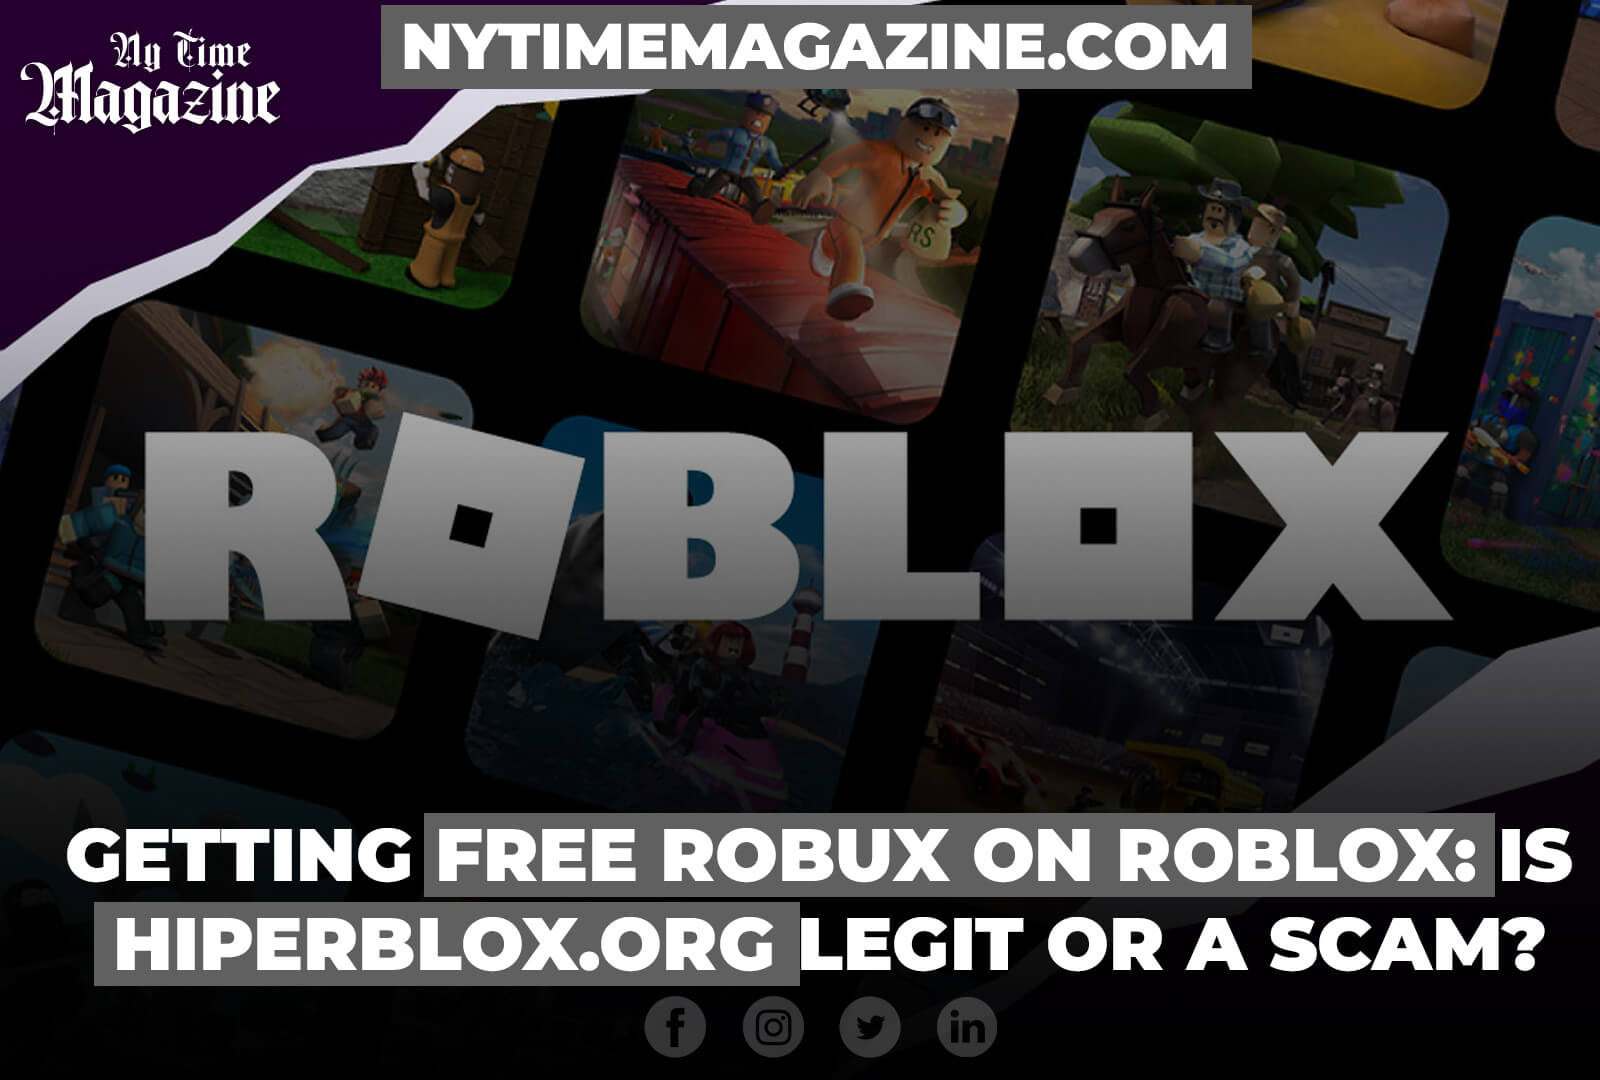 GETTING FREE ROBUX ON ROBLOX: IS HIPERBLOX.ORG LEGIT OR A SCAM?